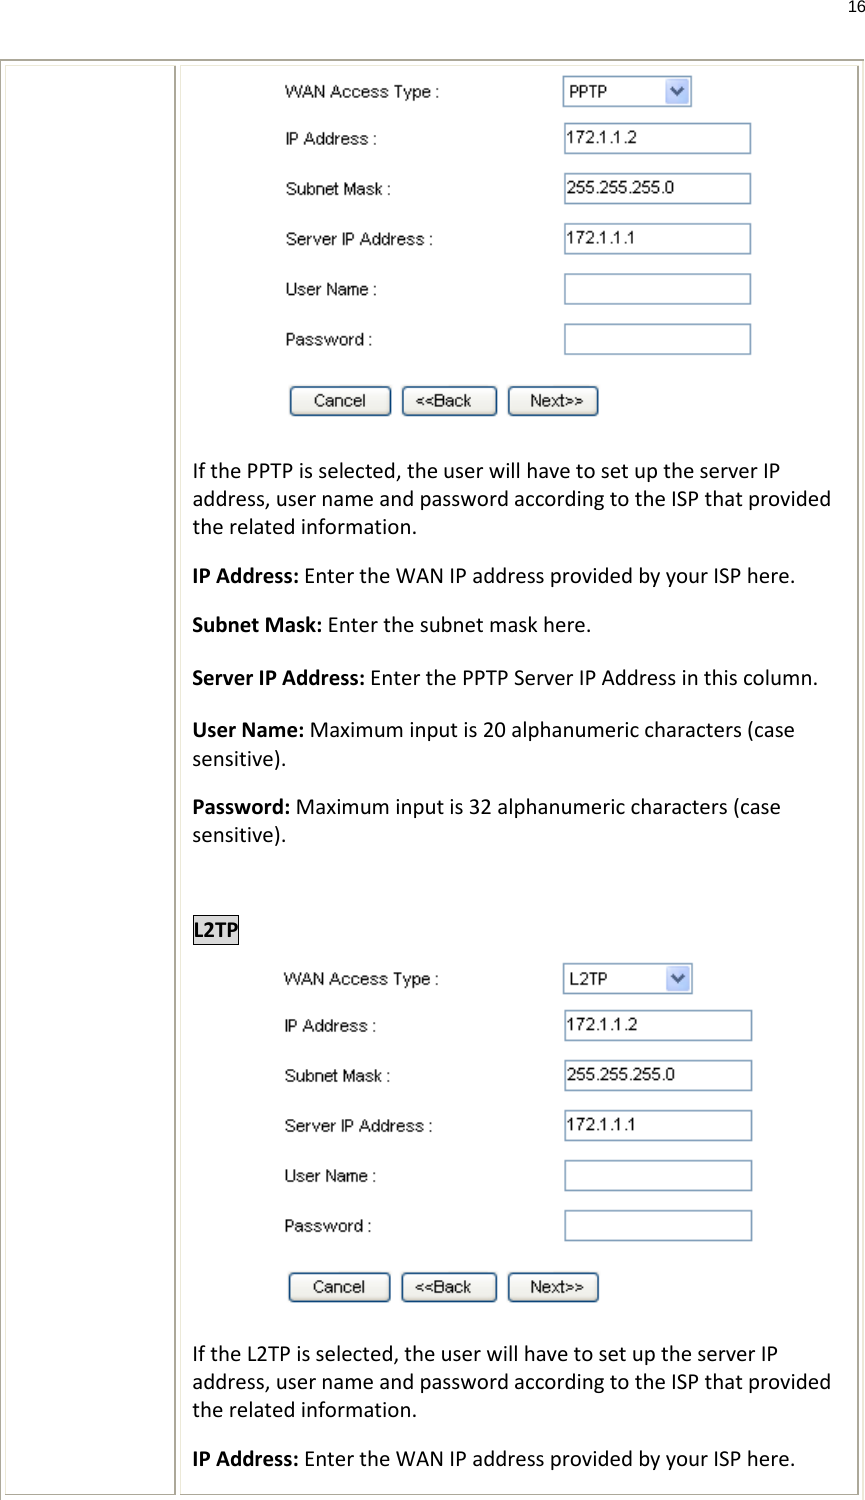 16   If the PPTP is selected, the user will have to set up the server IP address, user name and password according to the ISP that provided the related information. IP Address: Enter the WAN IP address provided by your ISP here. Subnet Mask: Enter the subnet mask here. Server IP Address: Enter the PPTP Server IP Address in this column. User Name: Maximum input is 20 alphanumeric characters (case sensitive). Password: Maximum input is 32 alphanumeric characters (case sensitive).  L2TP  If the L2TP is selected, the user will have to set up the server IP address, user name and password according to the ISP that provided the related information. IP Address: Enter the WAN IP address provided by your ISP here. 